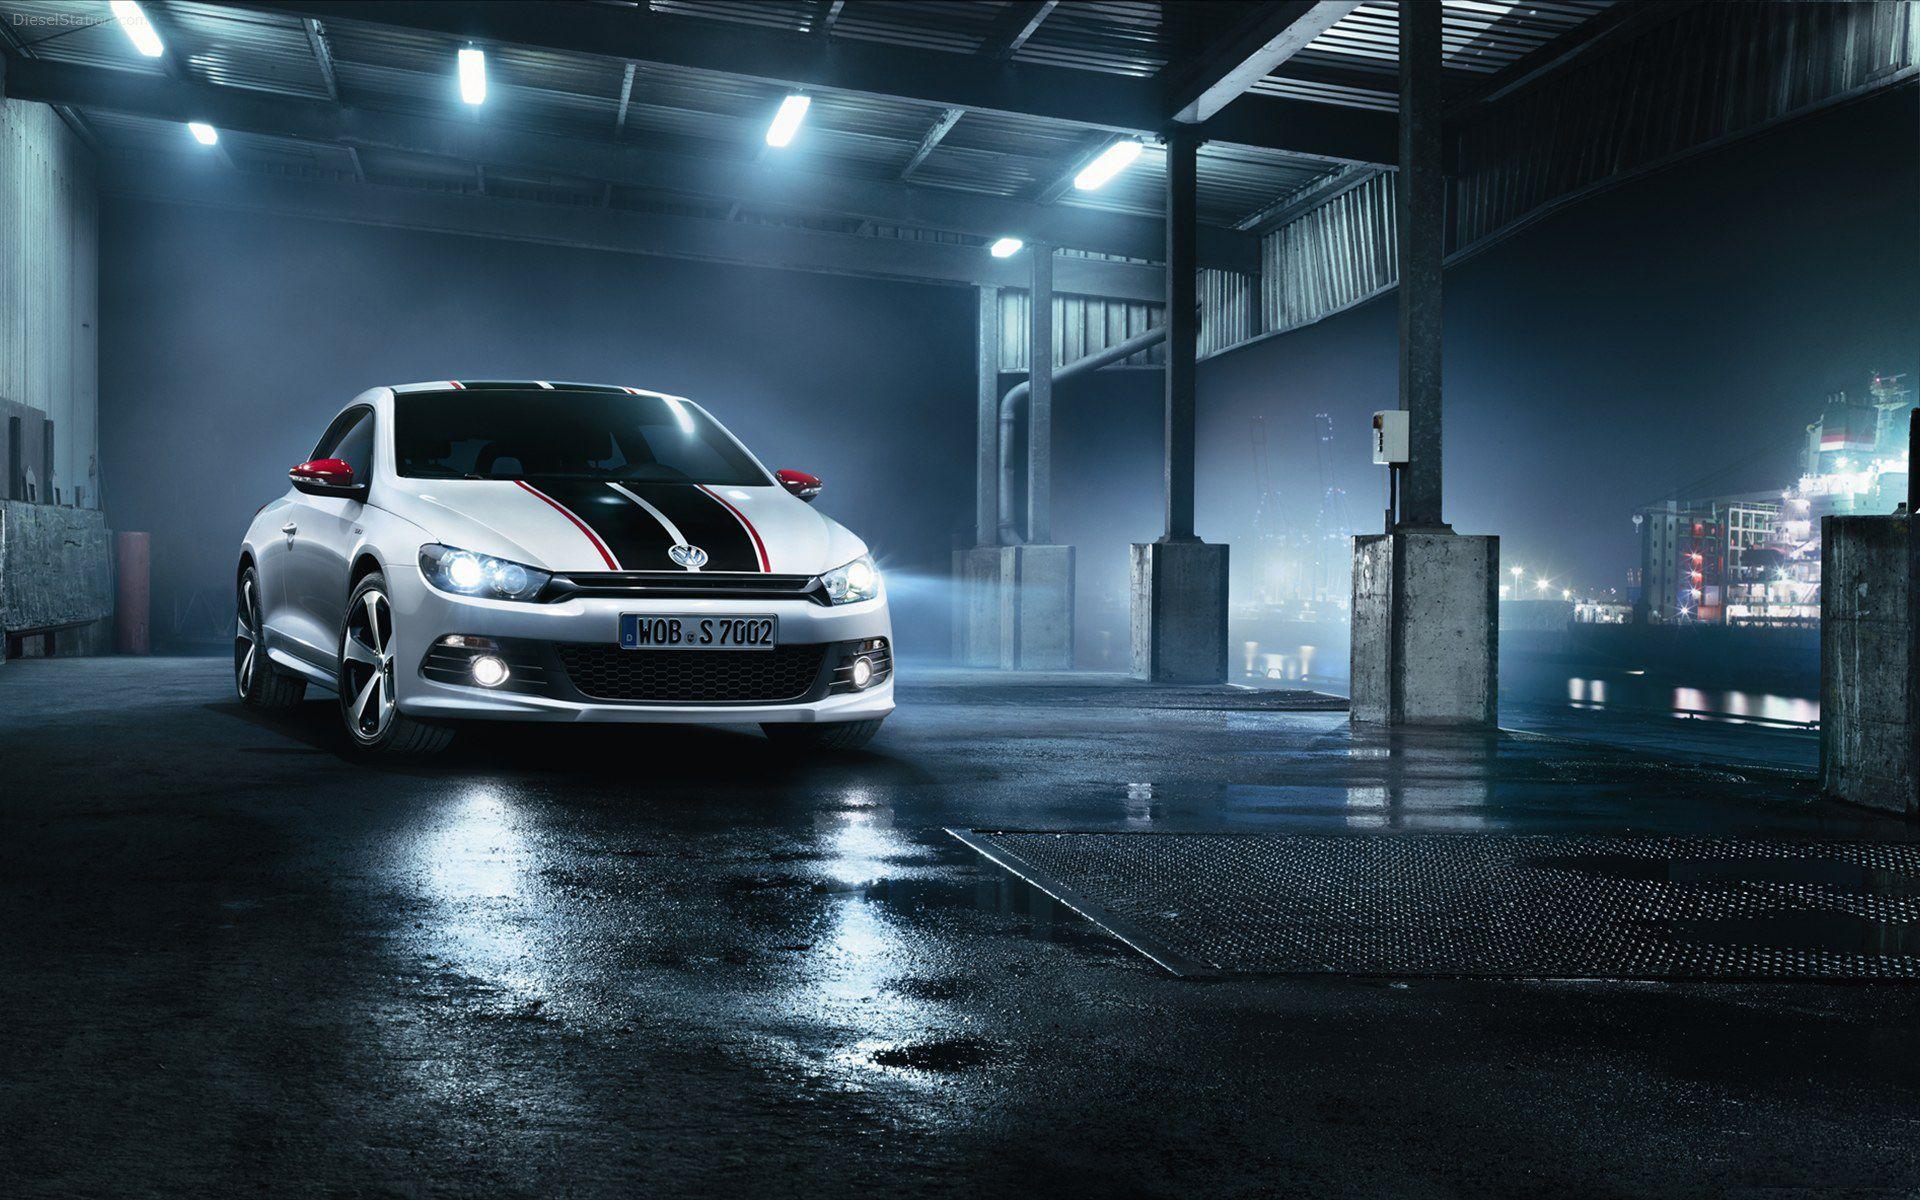 Need For Speed Most Wanted Volkswagen Scirocco wallpaper